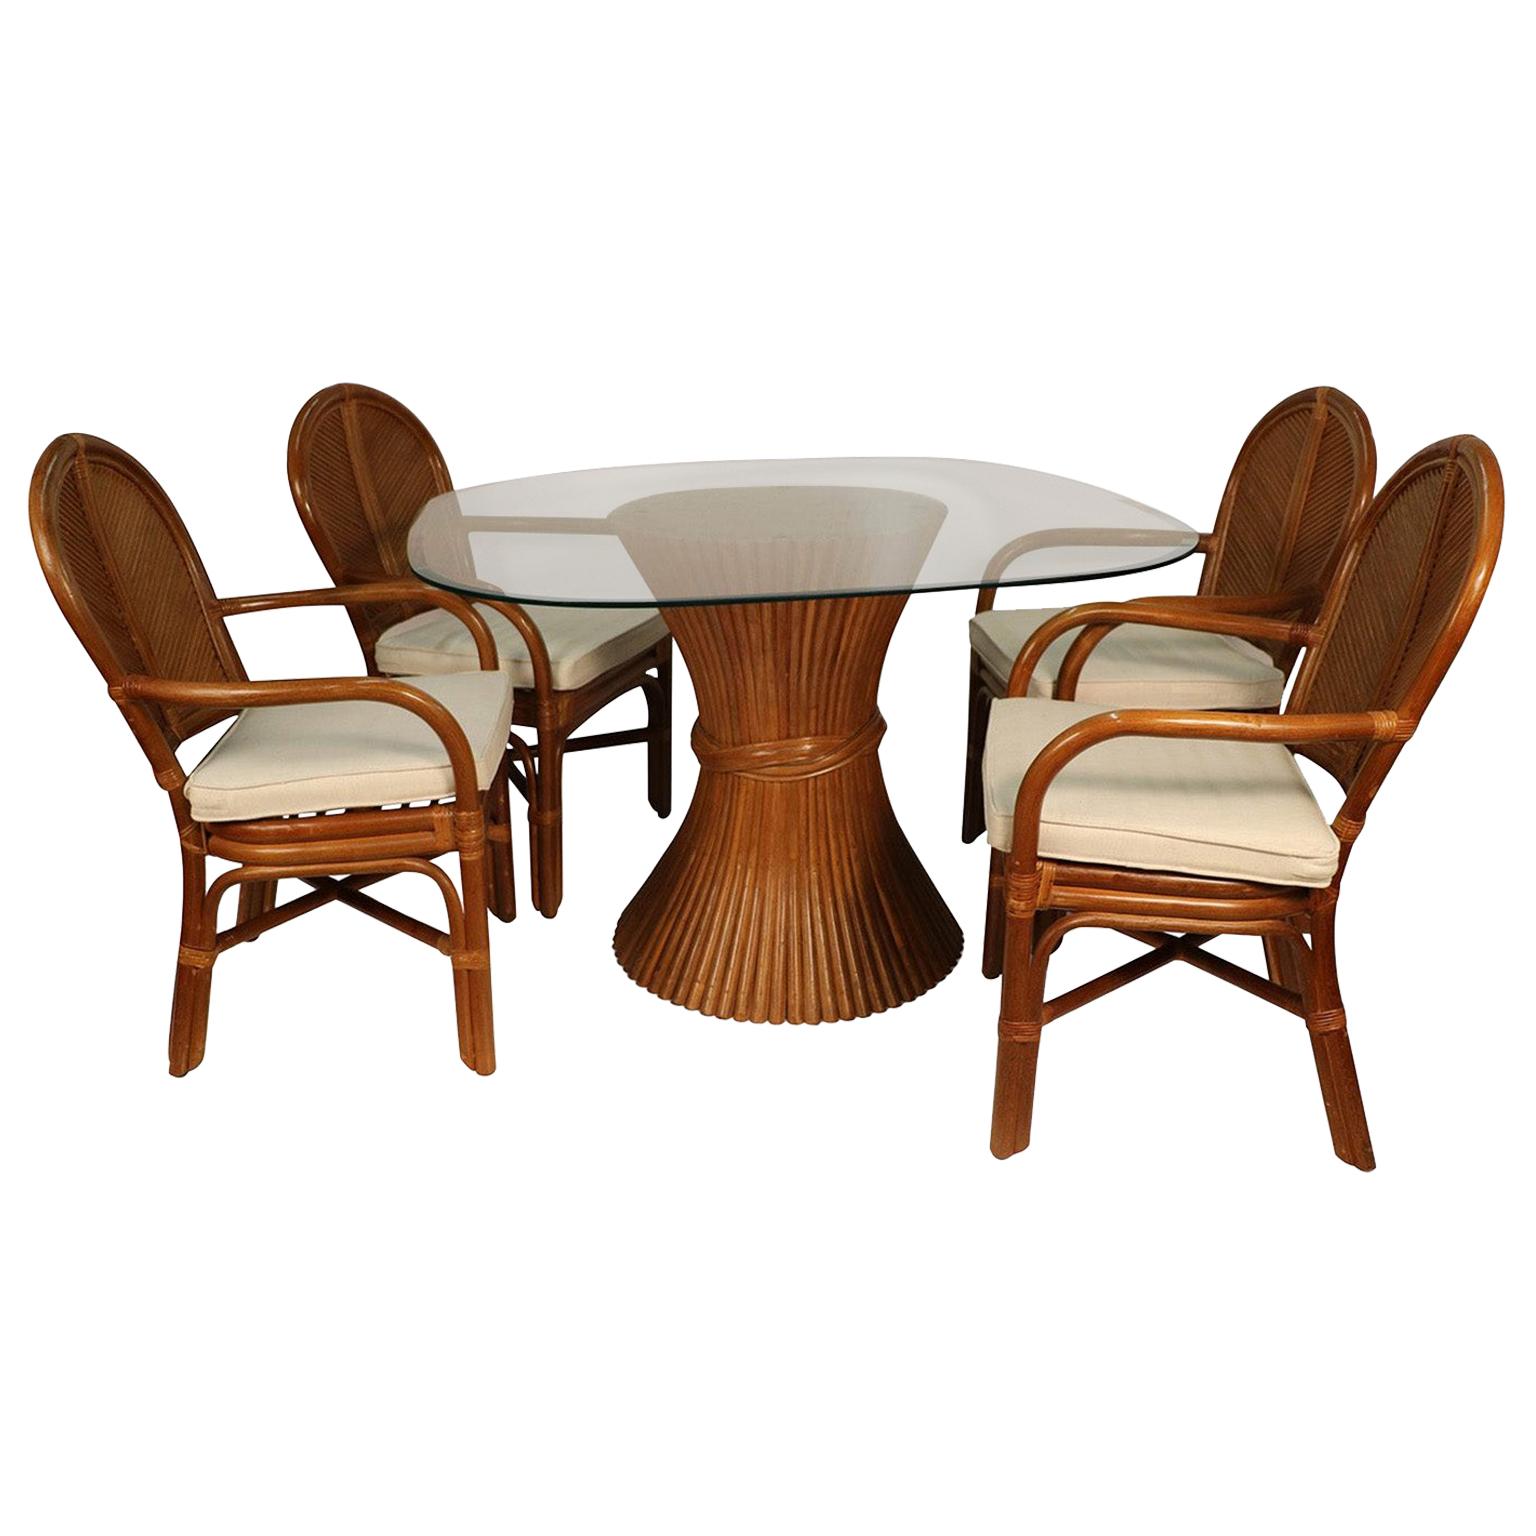 Sheaf of Wheat Rattan Dining Table and Chairs